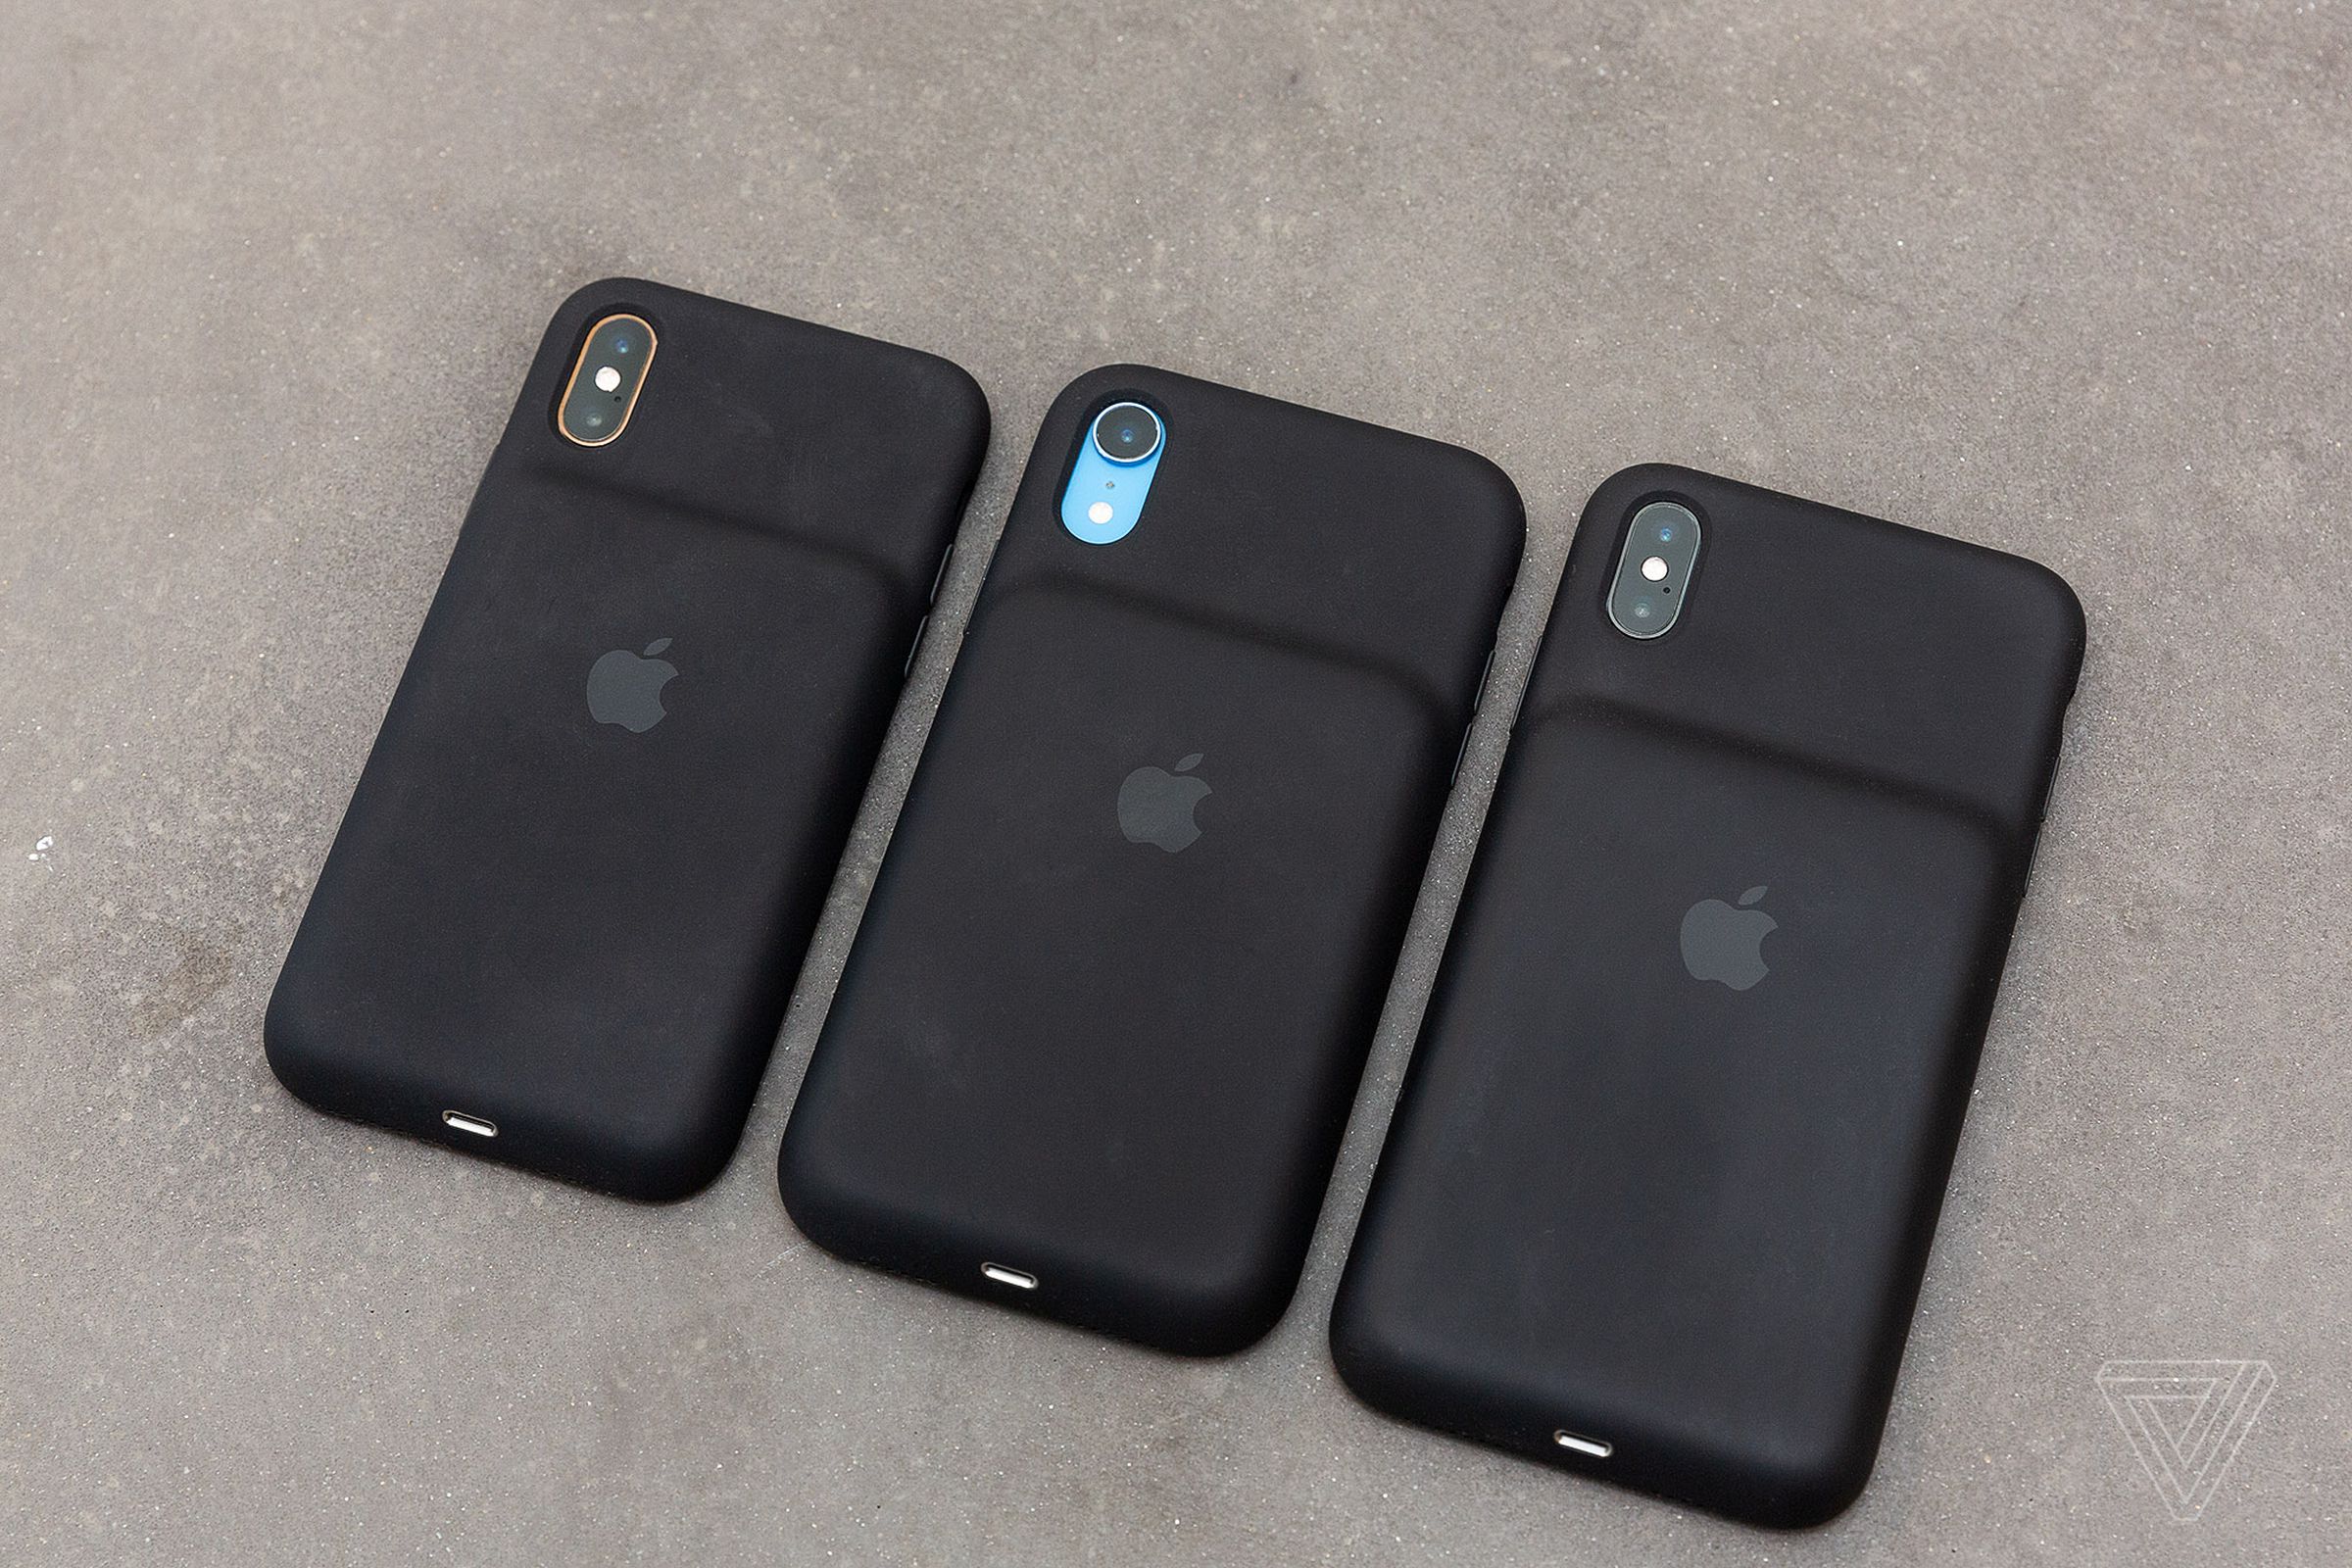 Apple’s Smart Battery case shown on the iPhone XS, XR, and XS Max. Today’s deal excludes the iPhone XR’s case